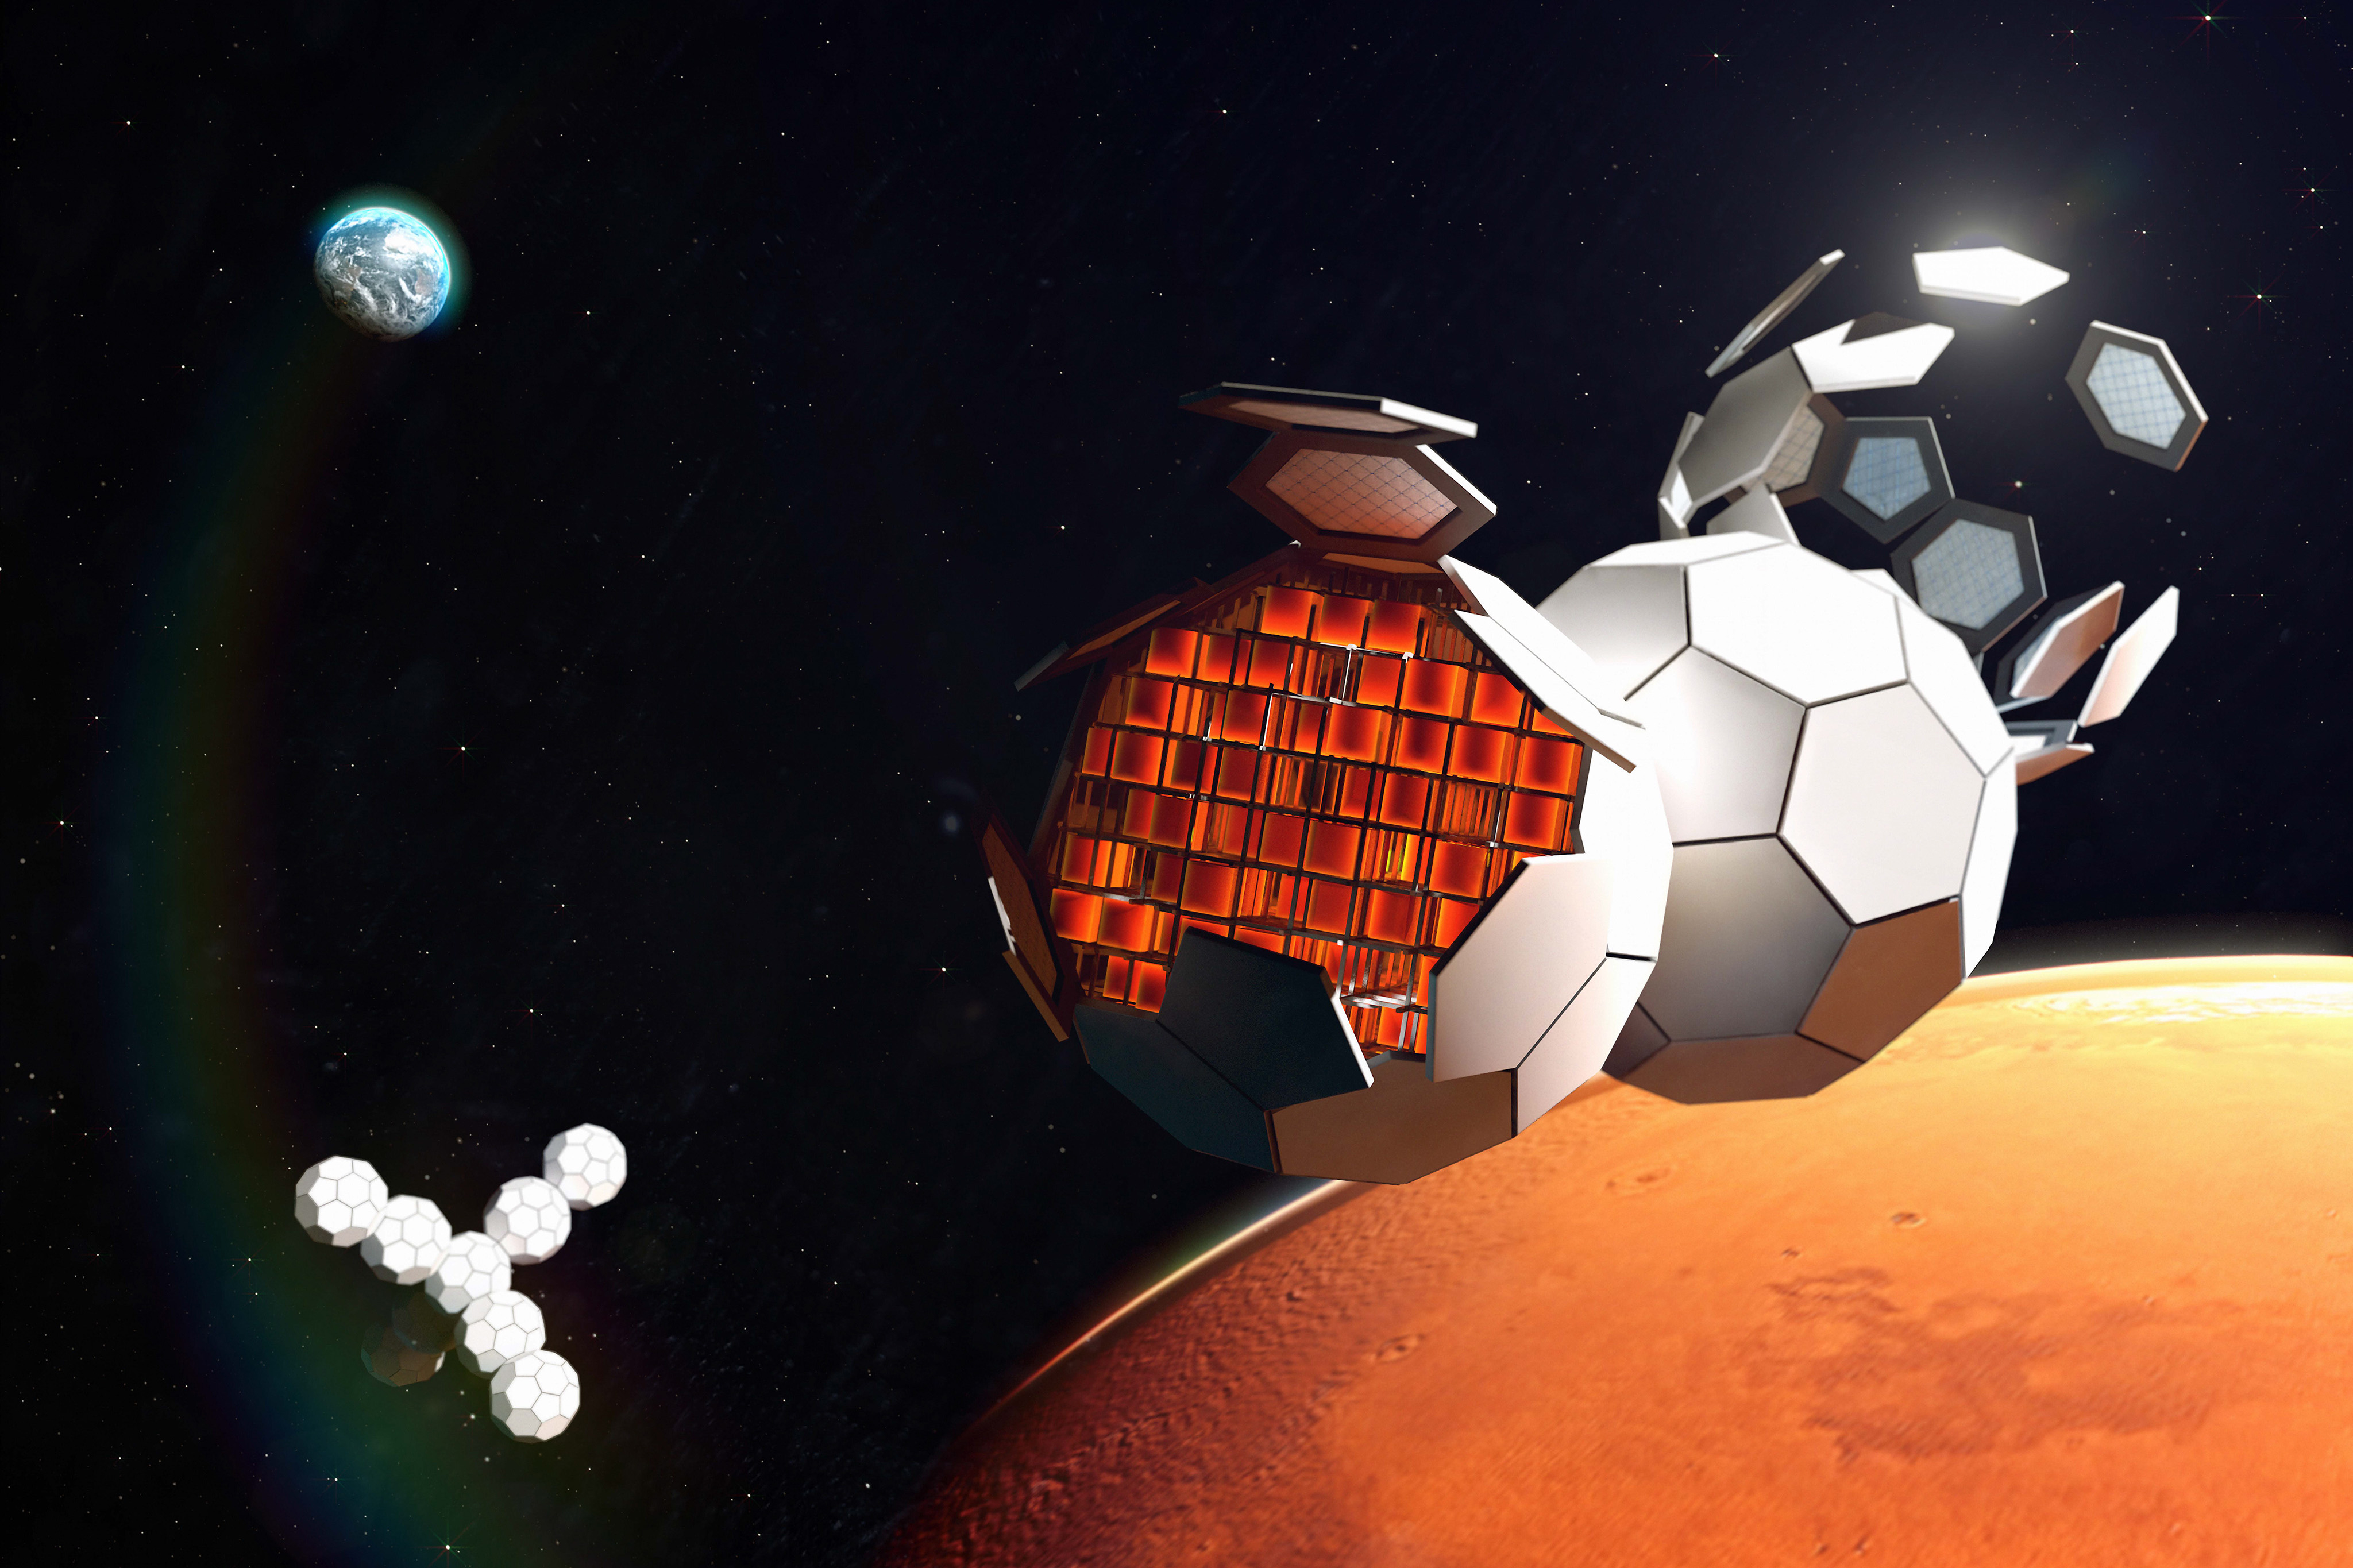 An artist’s illustration of TESSERAE habitats in space. Shown in foreground is a self-assembling storage unit, autonomously connecting to other structures.